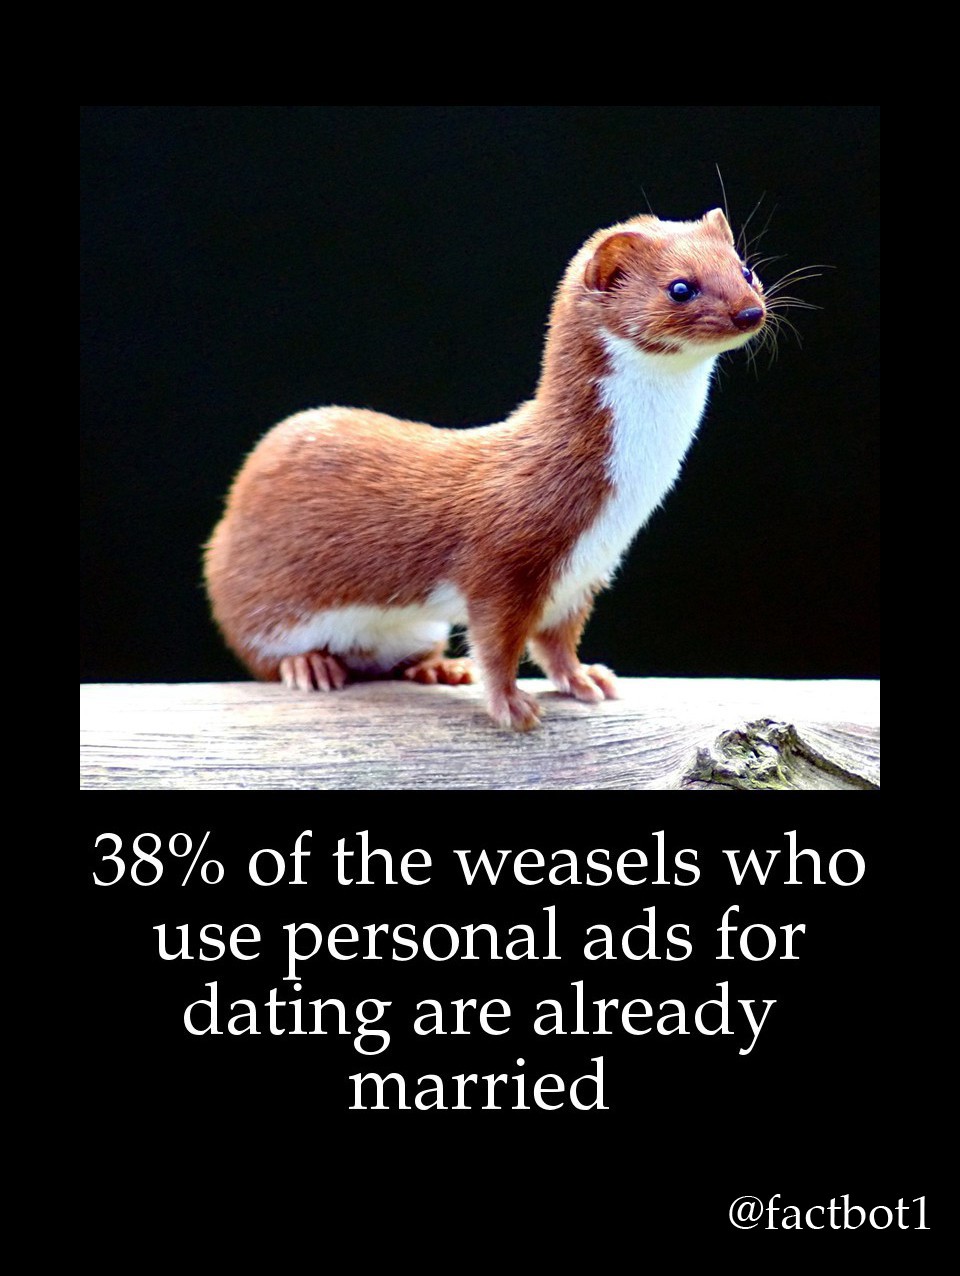 38% of the weasels who use personal ads for dating are already married